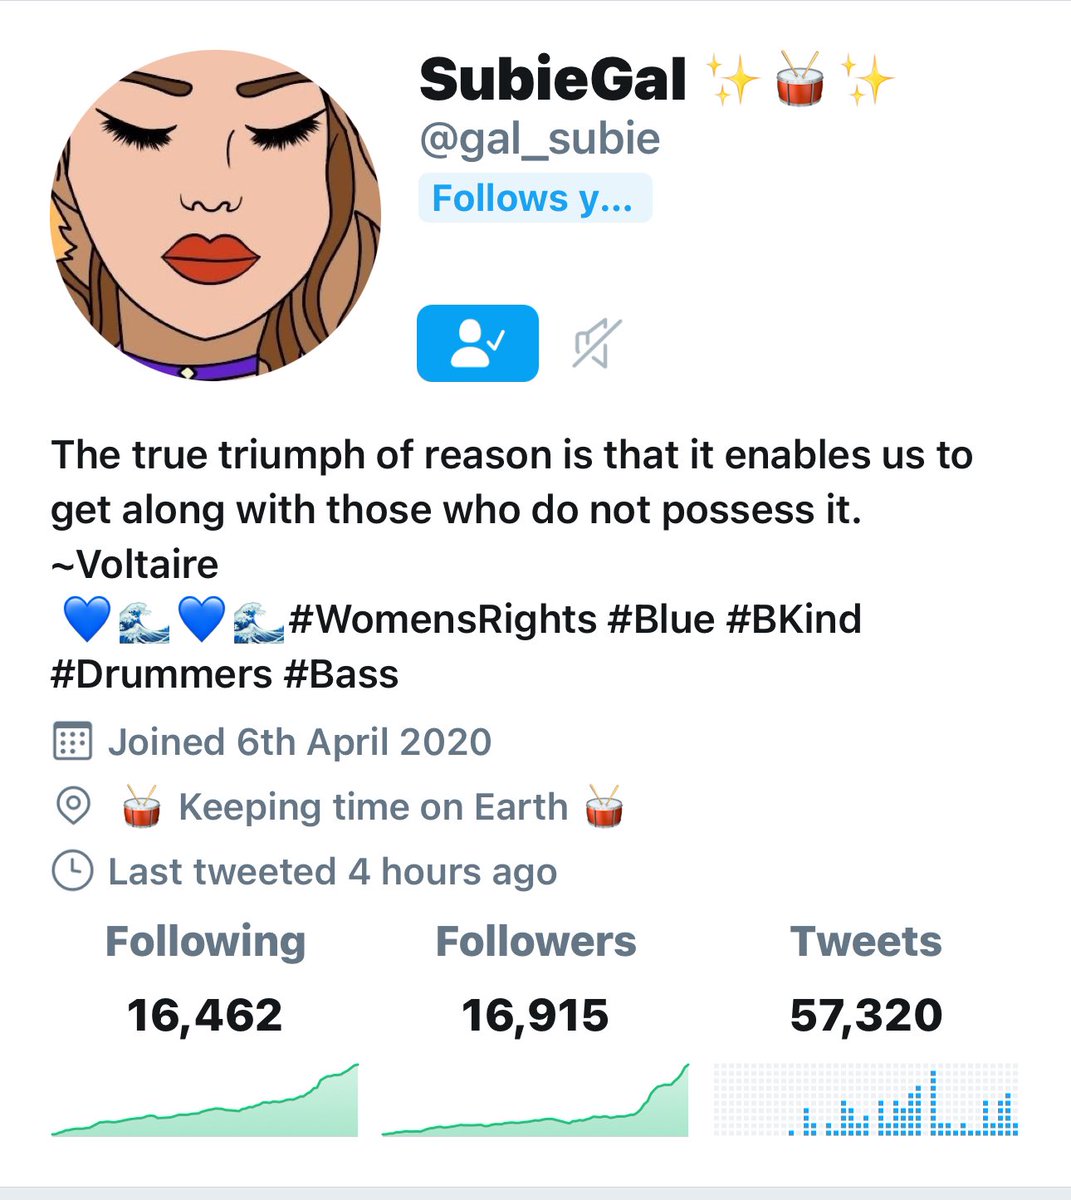 Subie Gal @gal_subie is getting close to 17K only 85 away. 💙REPOST💙